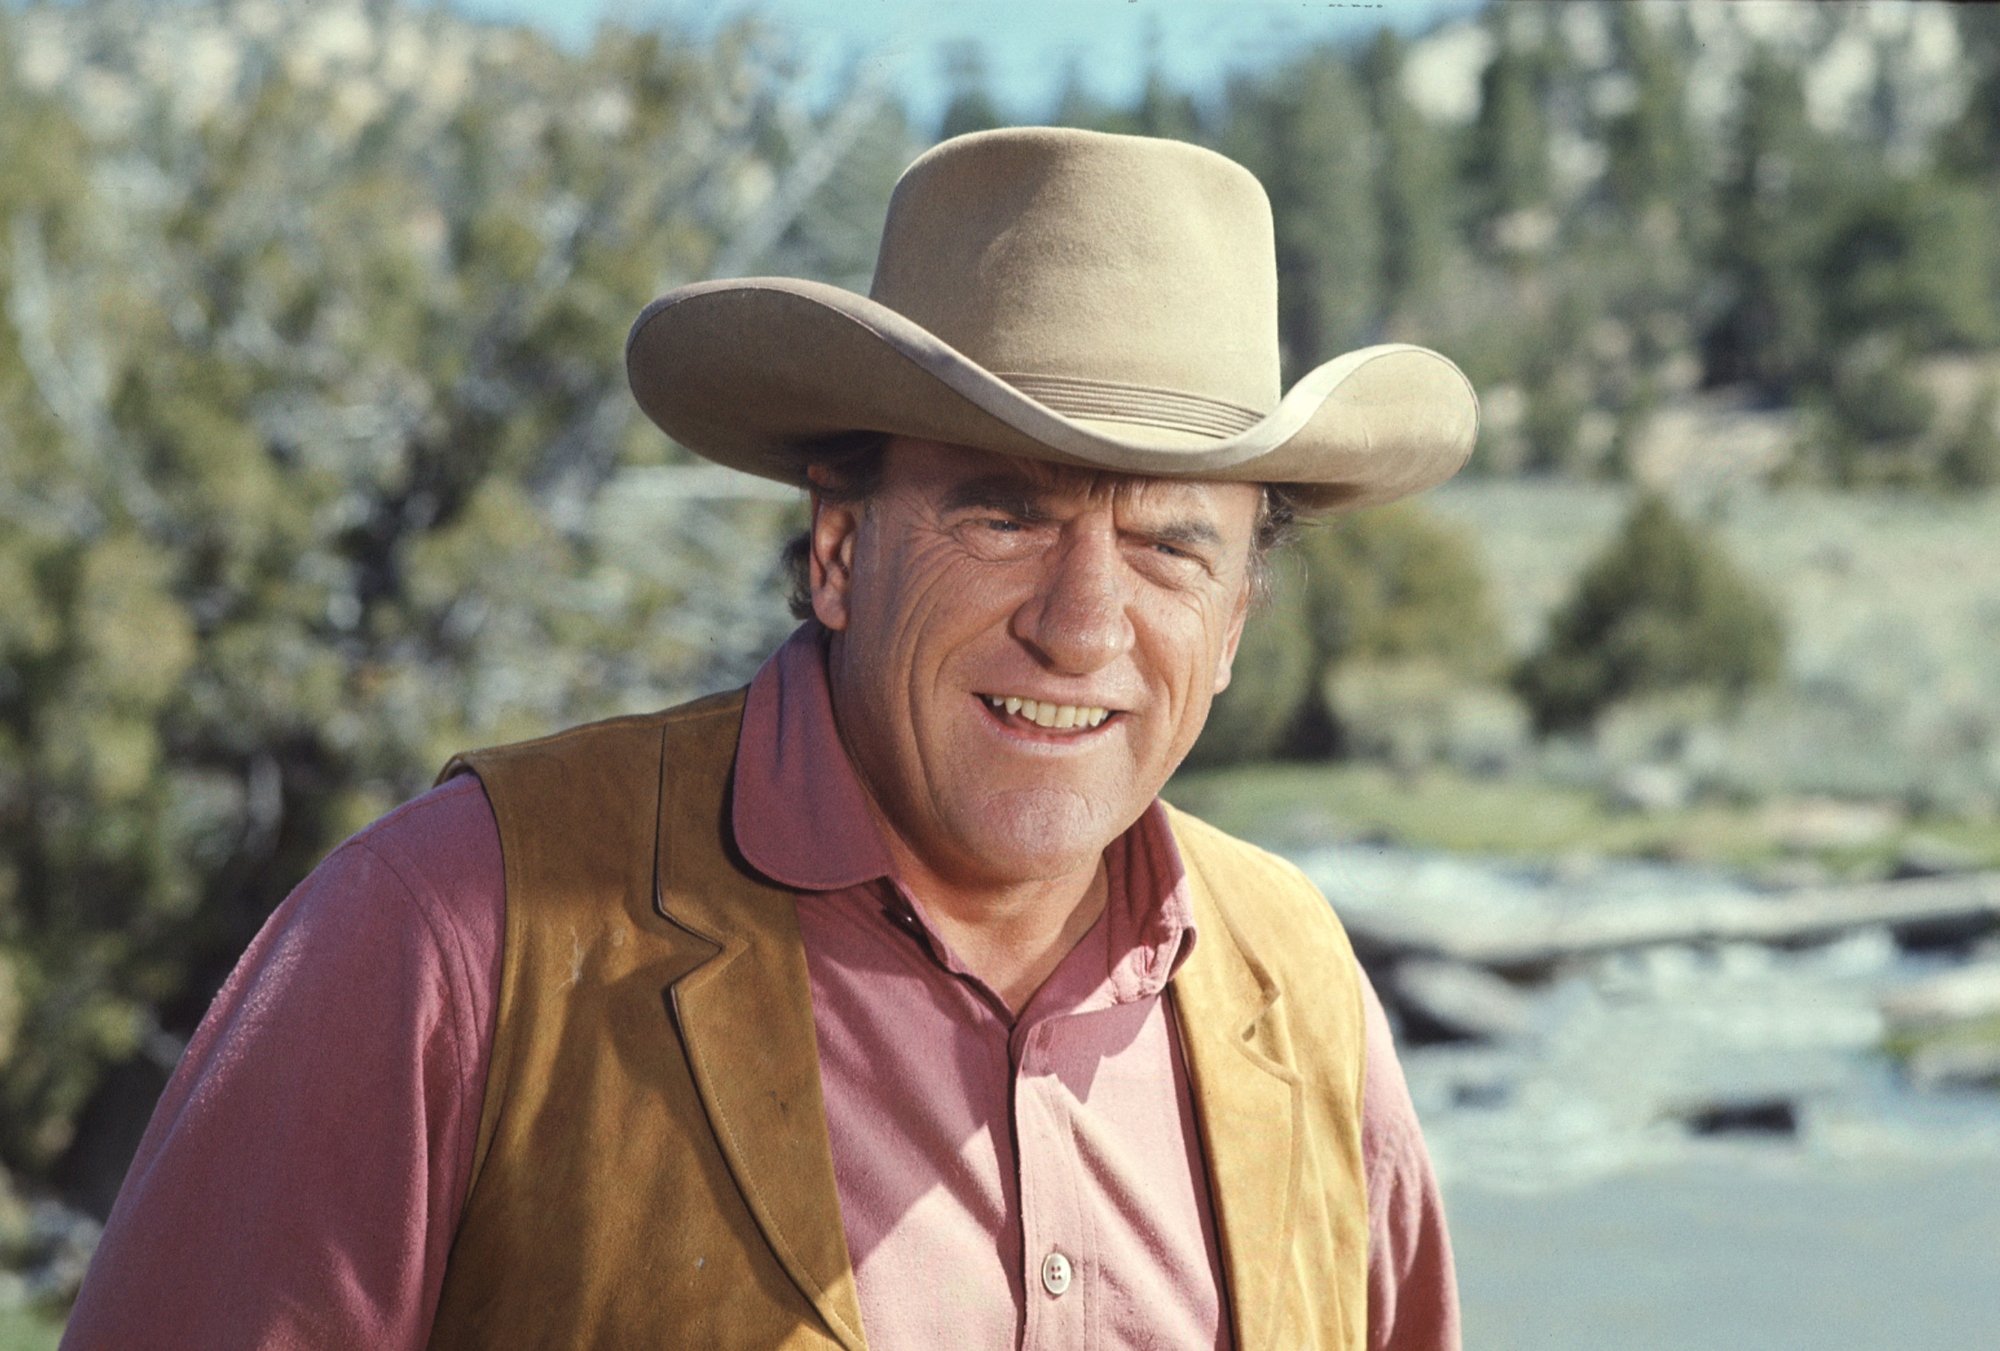 'Gunsmoke' actor James Arness as Matt Dillon smiling while wearing a Western costume and cowboy hat